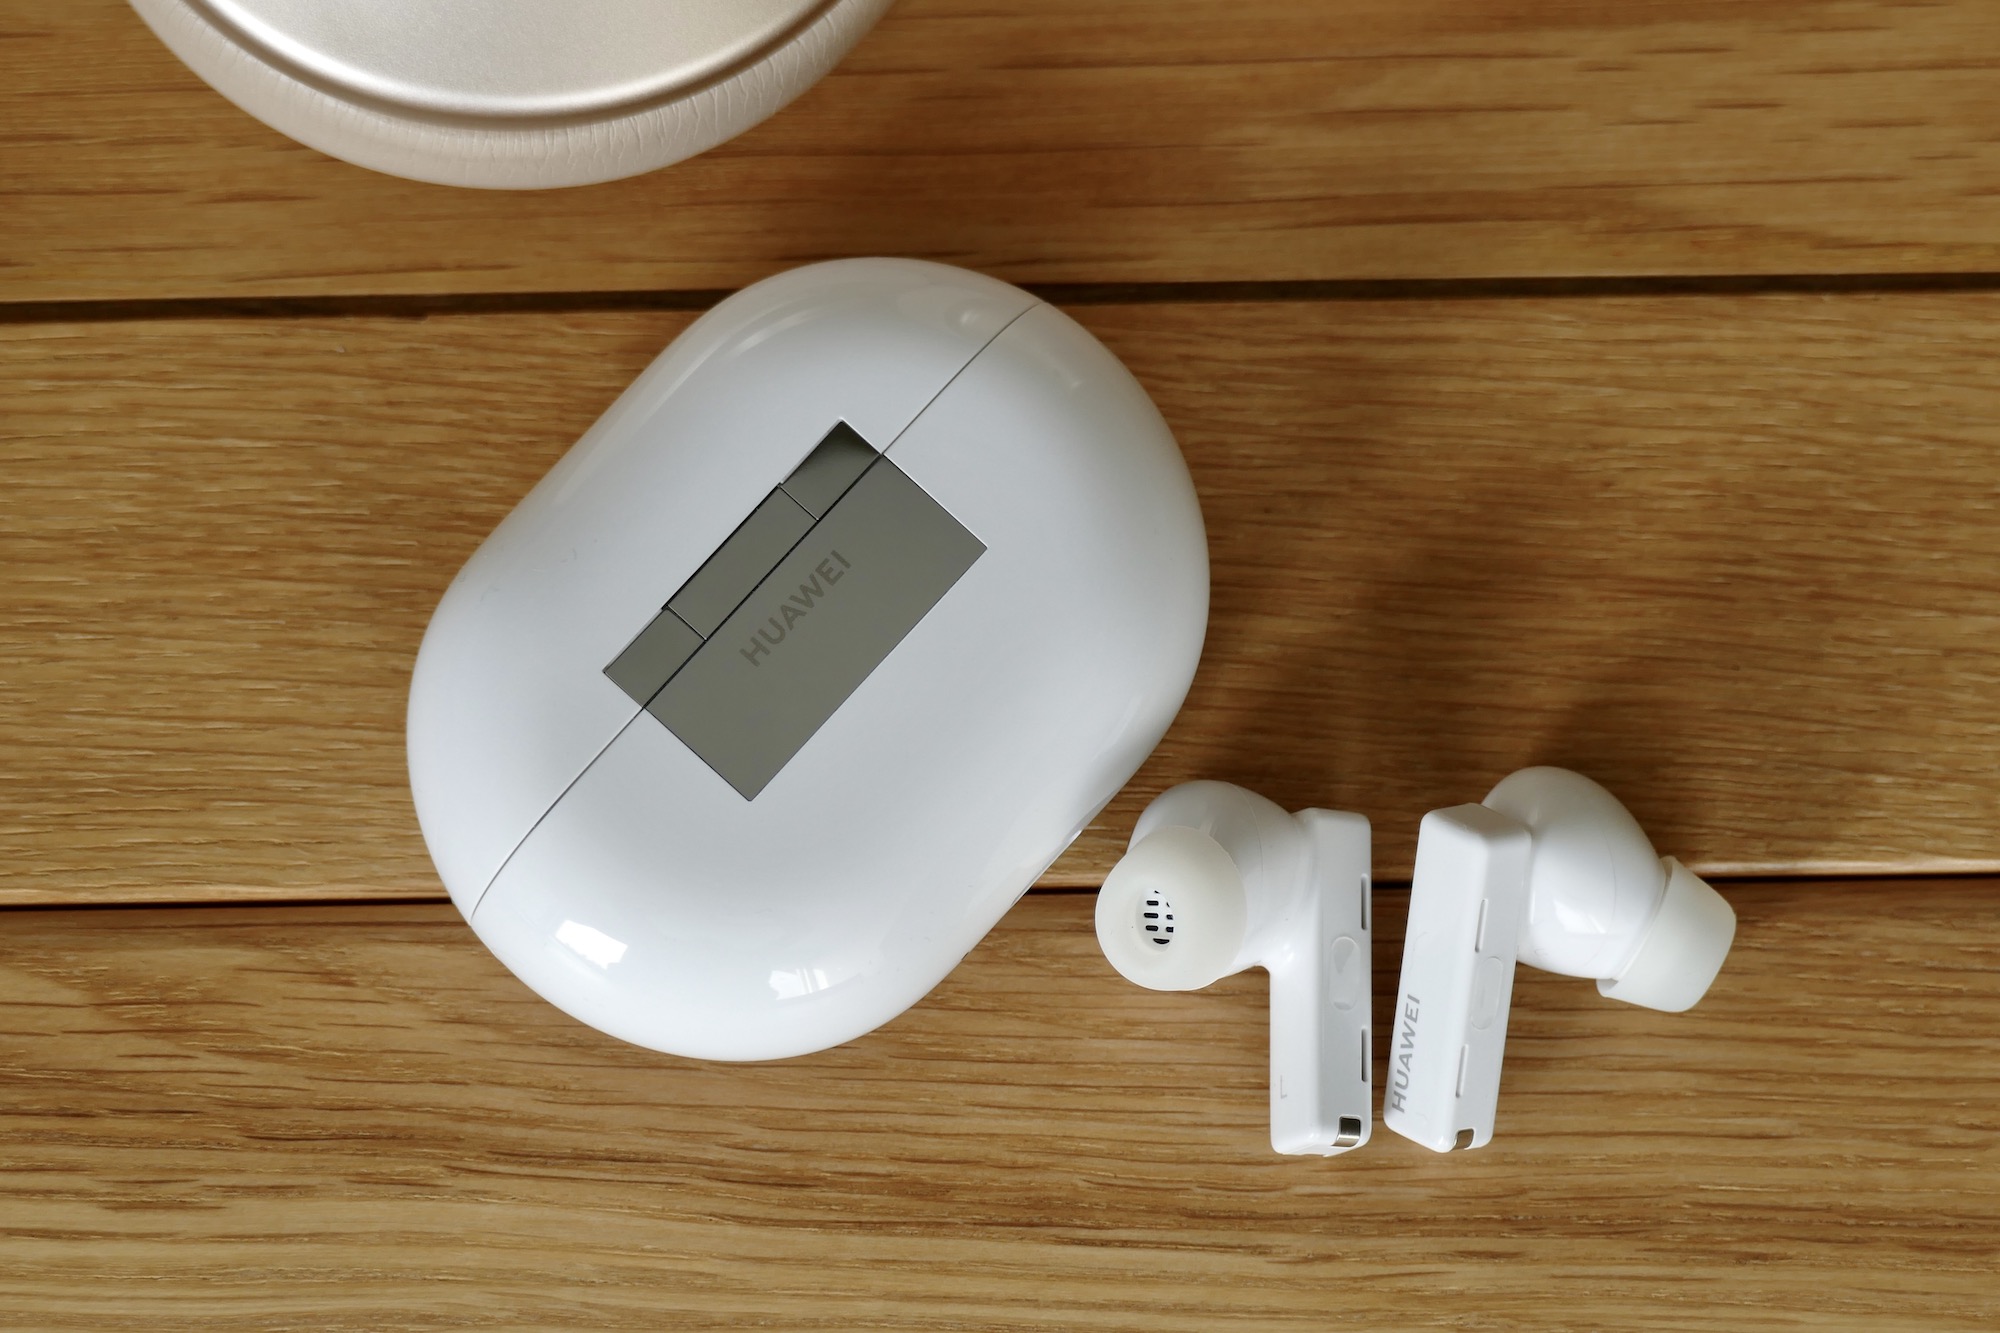 Huawei FreeBuds Pro review: Great sound from an unlikely source